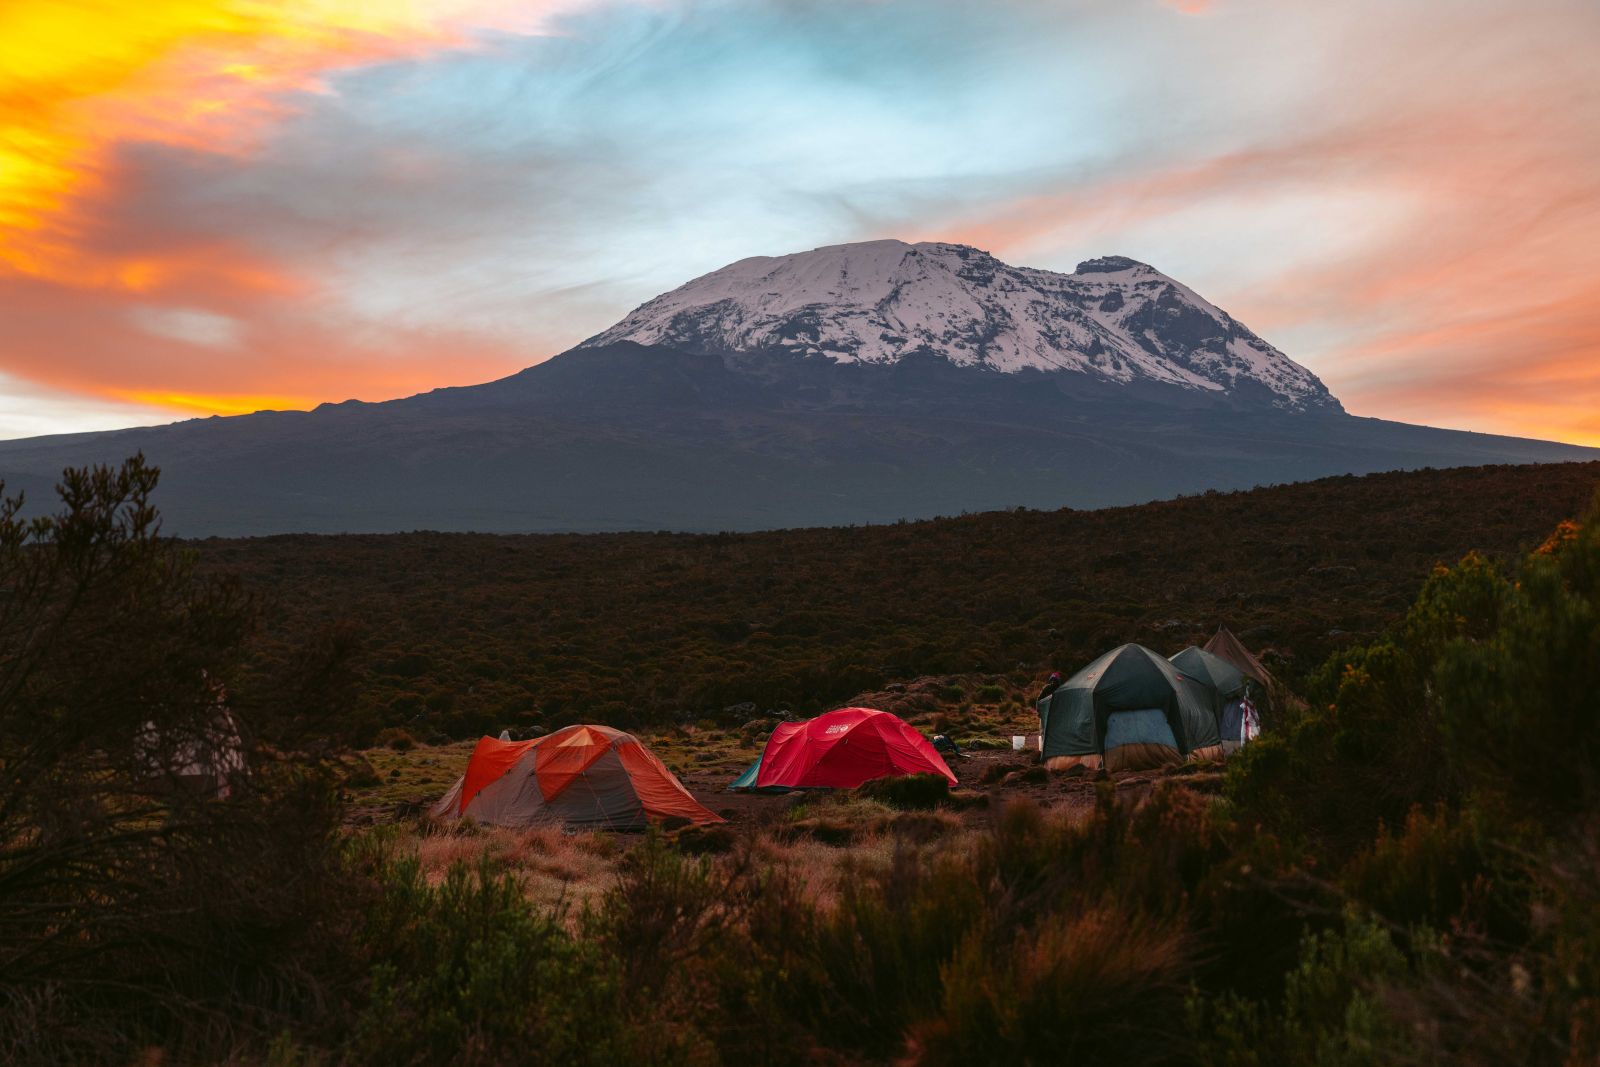 Basecamp of Kilimanjaro with tents in the foreground